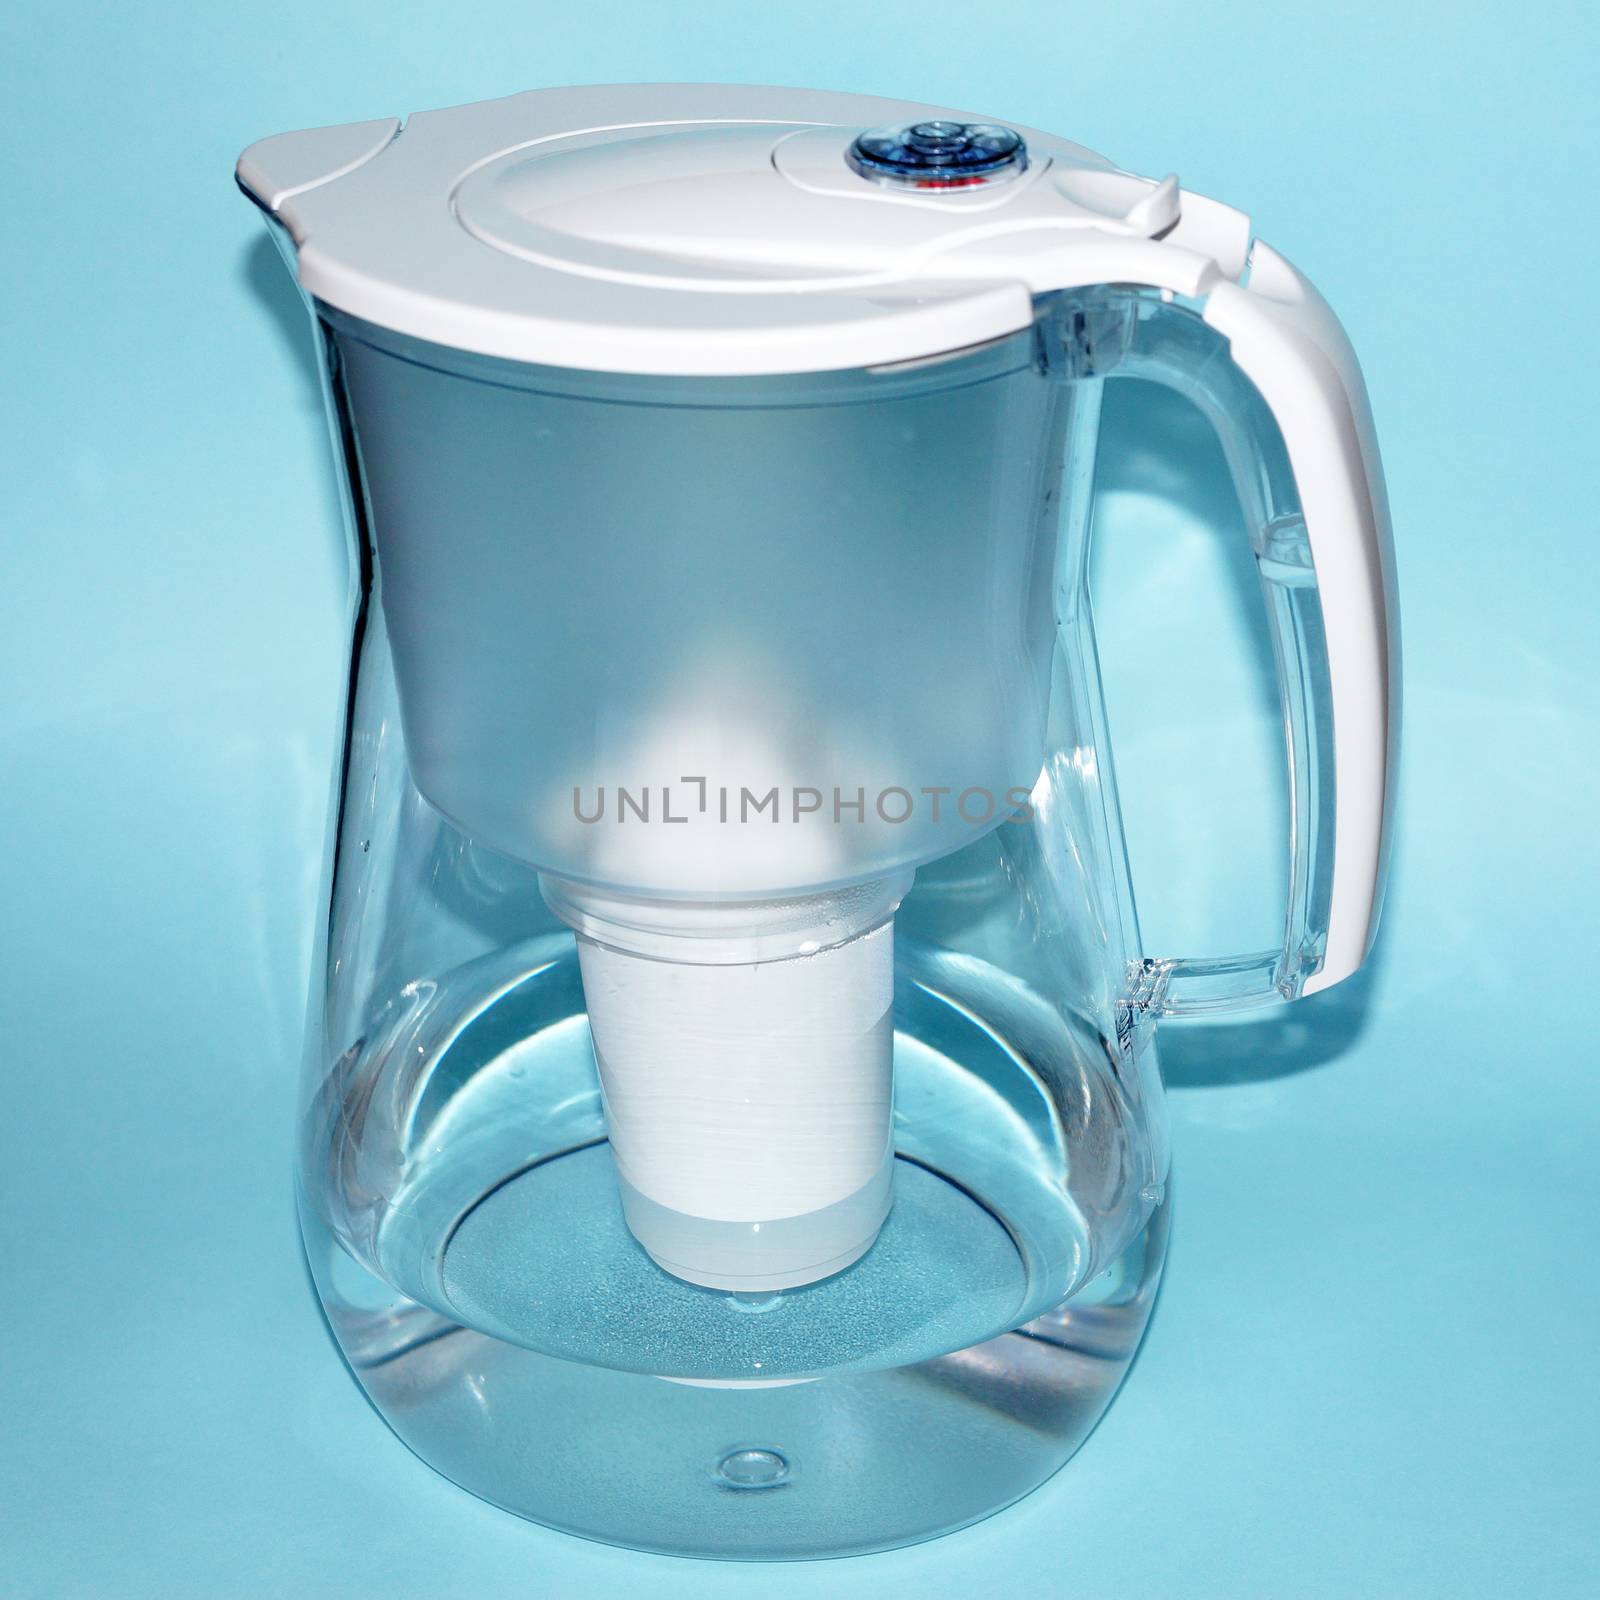 a jug for filtering water on a blue background by Annado